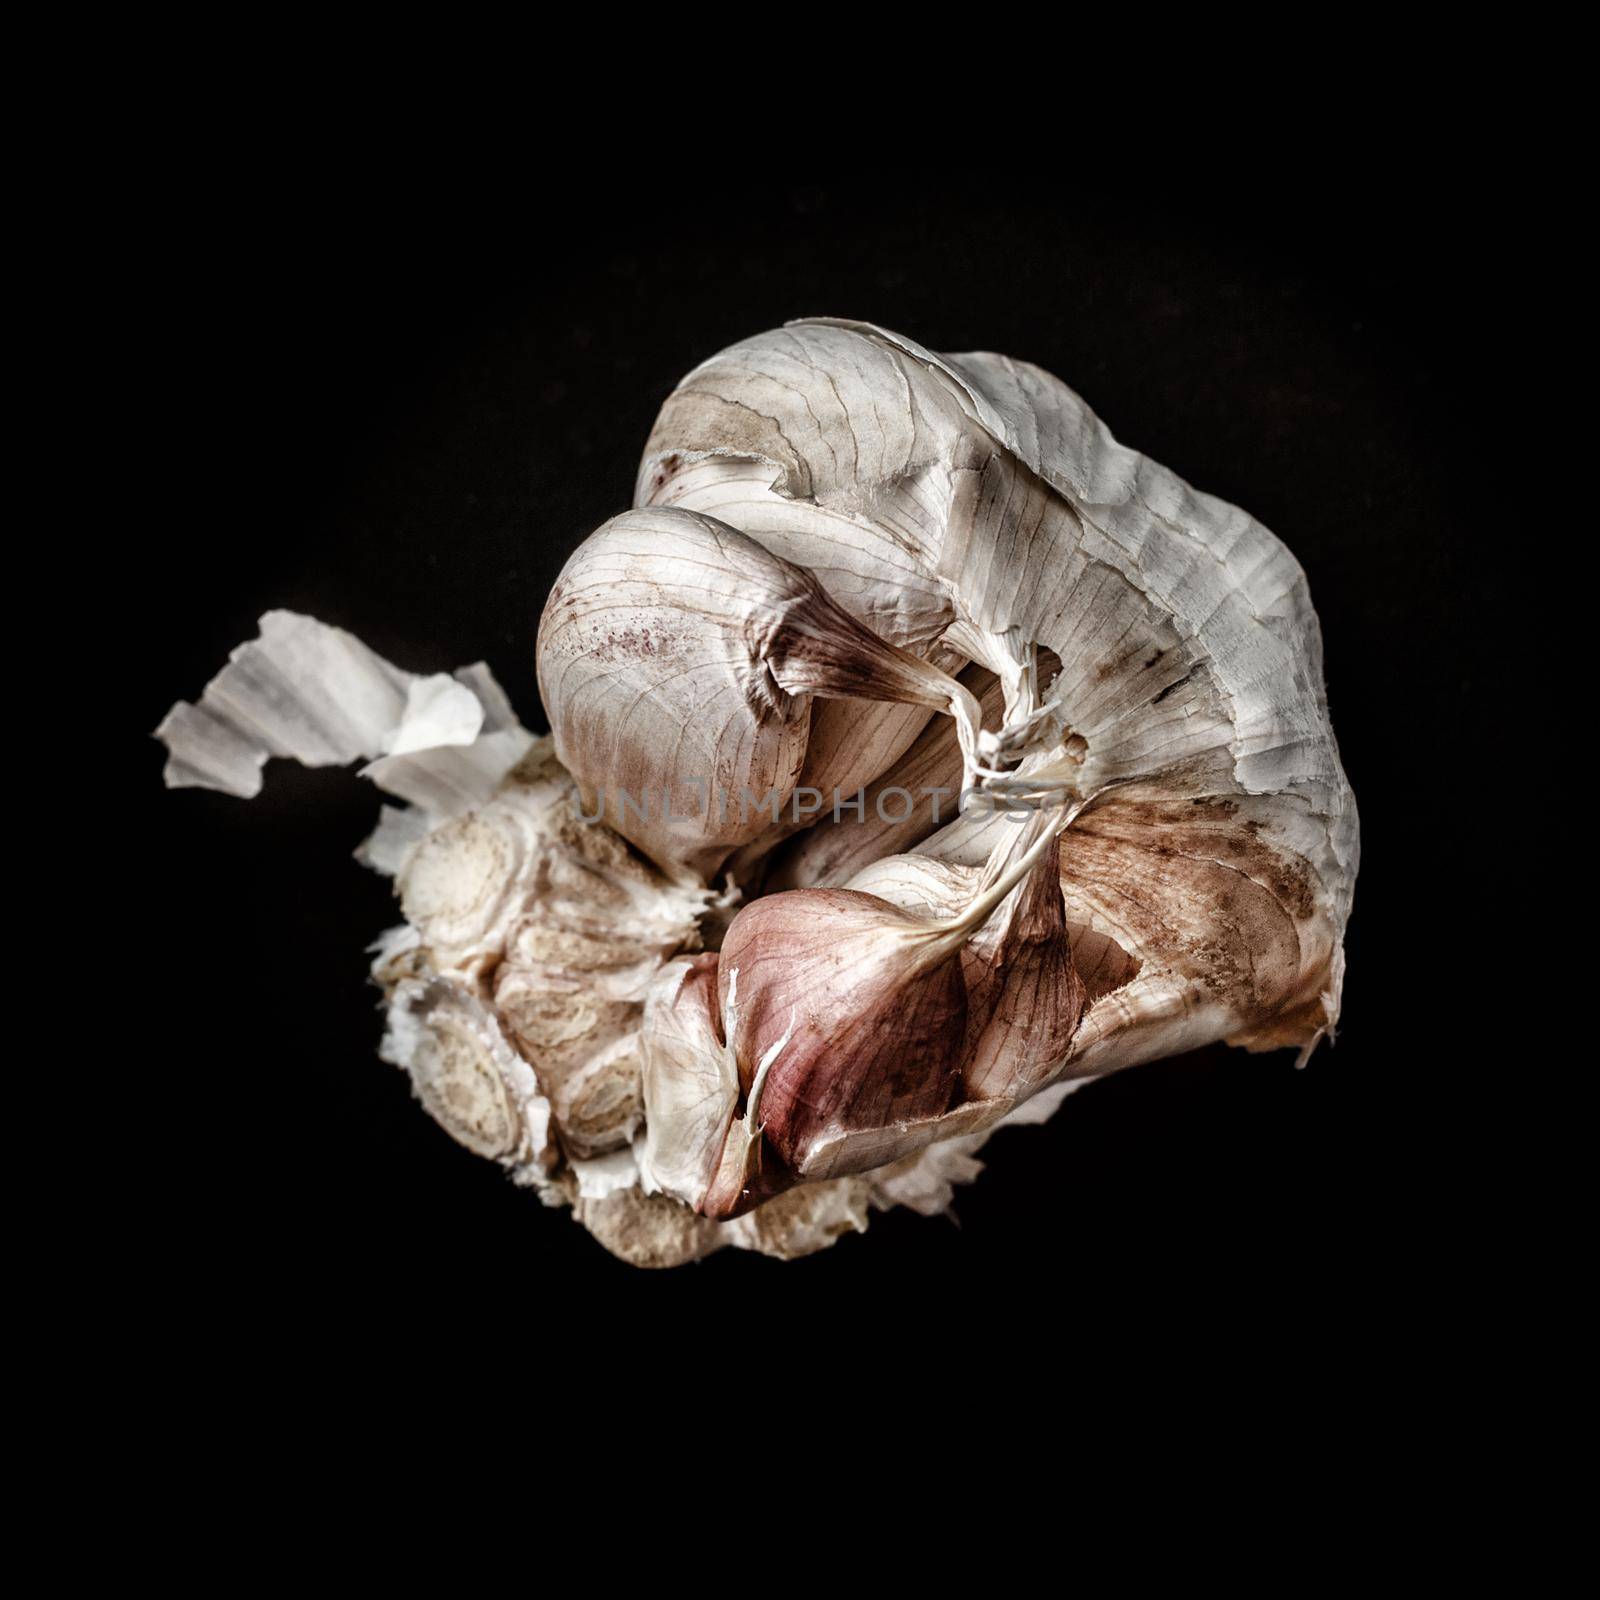 Garlic head in rustic style on black background. Square image